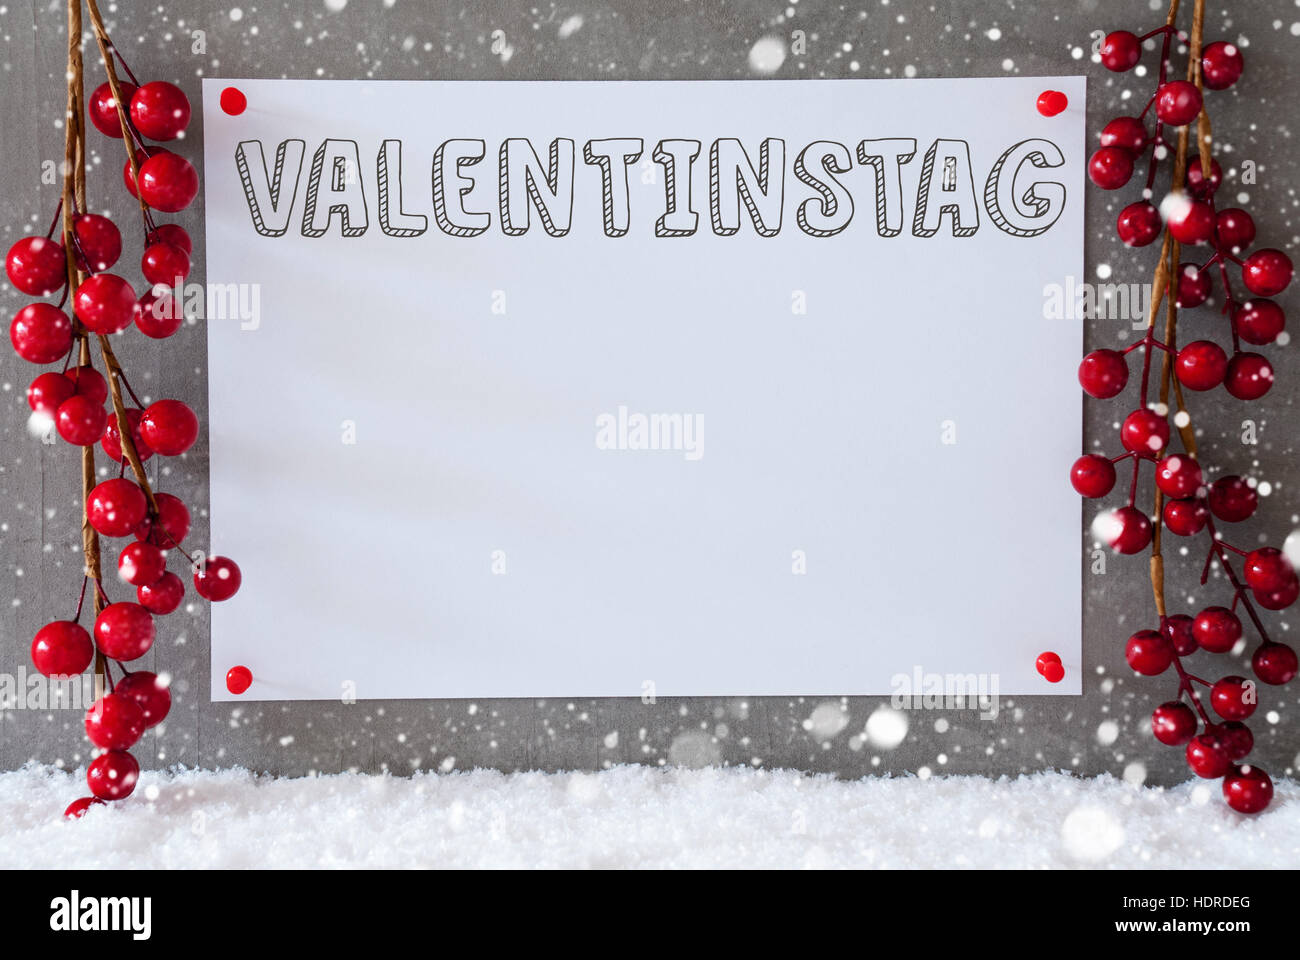 Label, Decoration, Snowflakes, Valentinstag Means Valentines Day Stock Photo